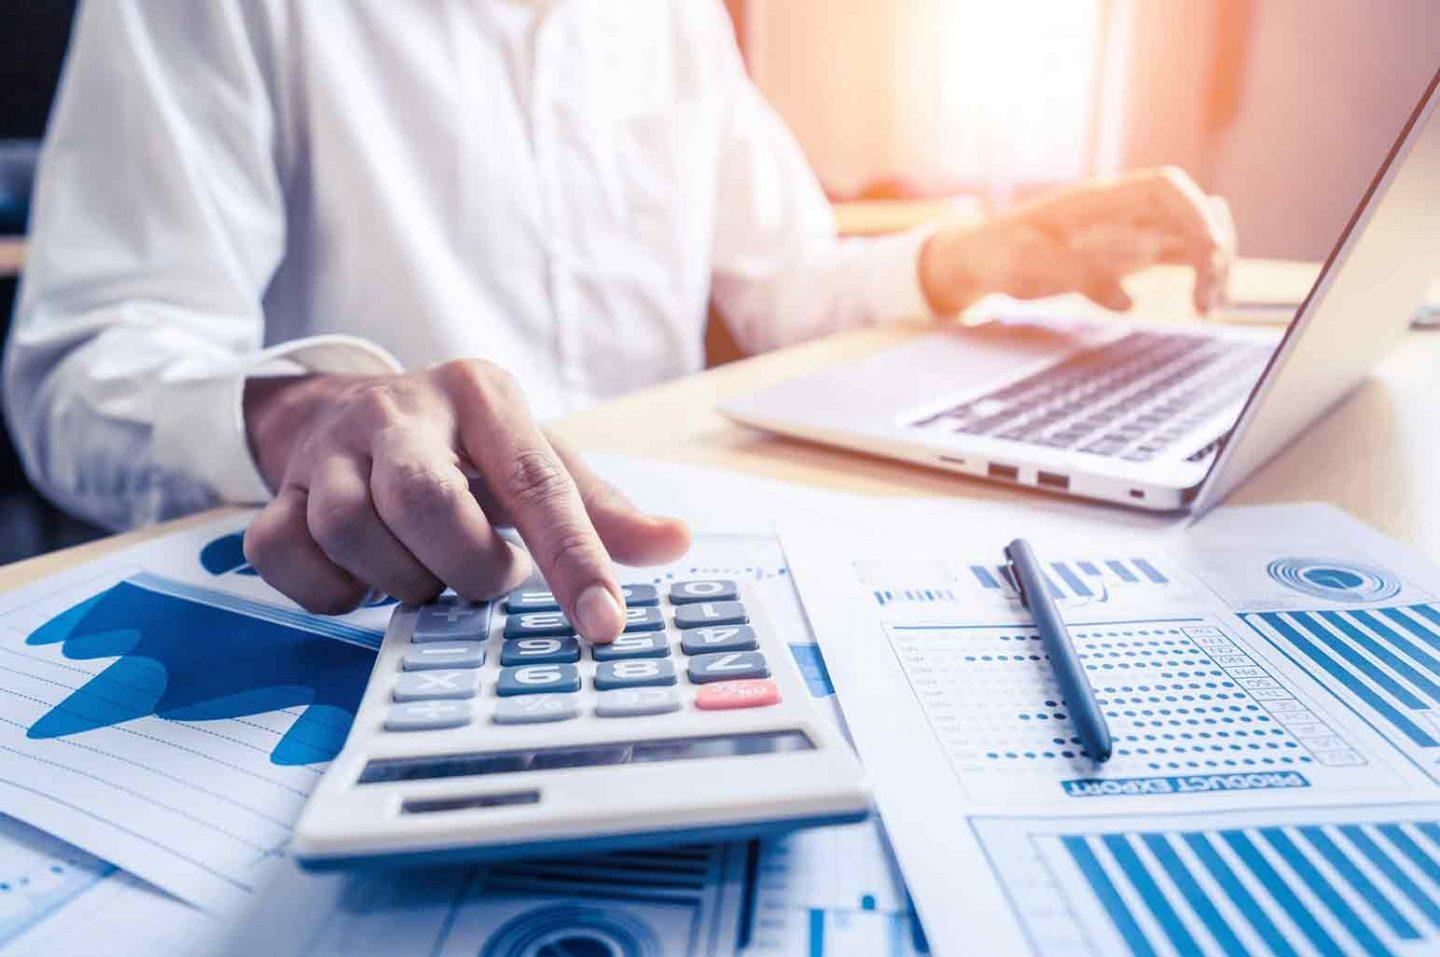 How To Estimate And Manage Your Business Finances